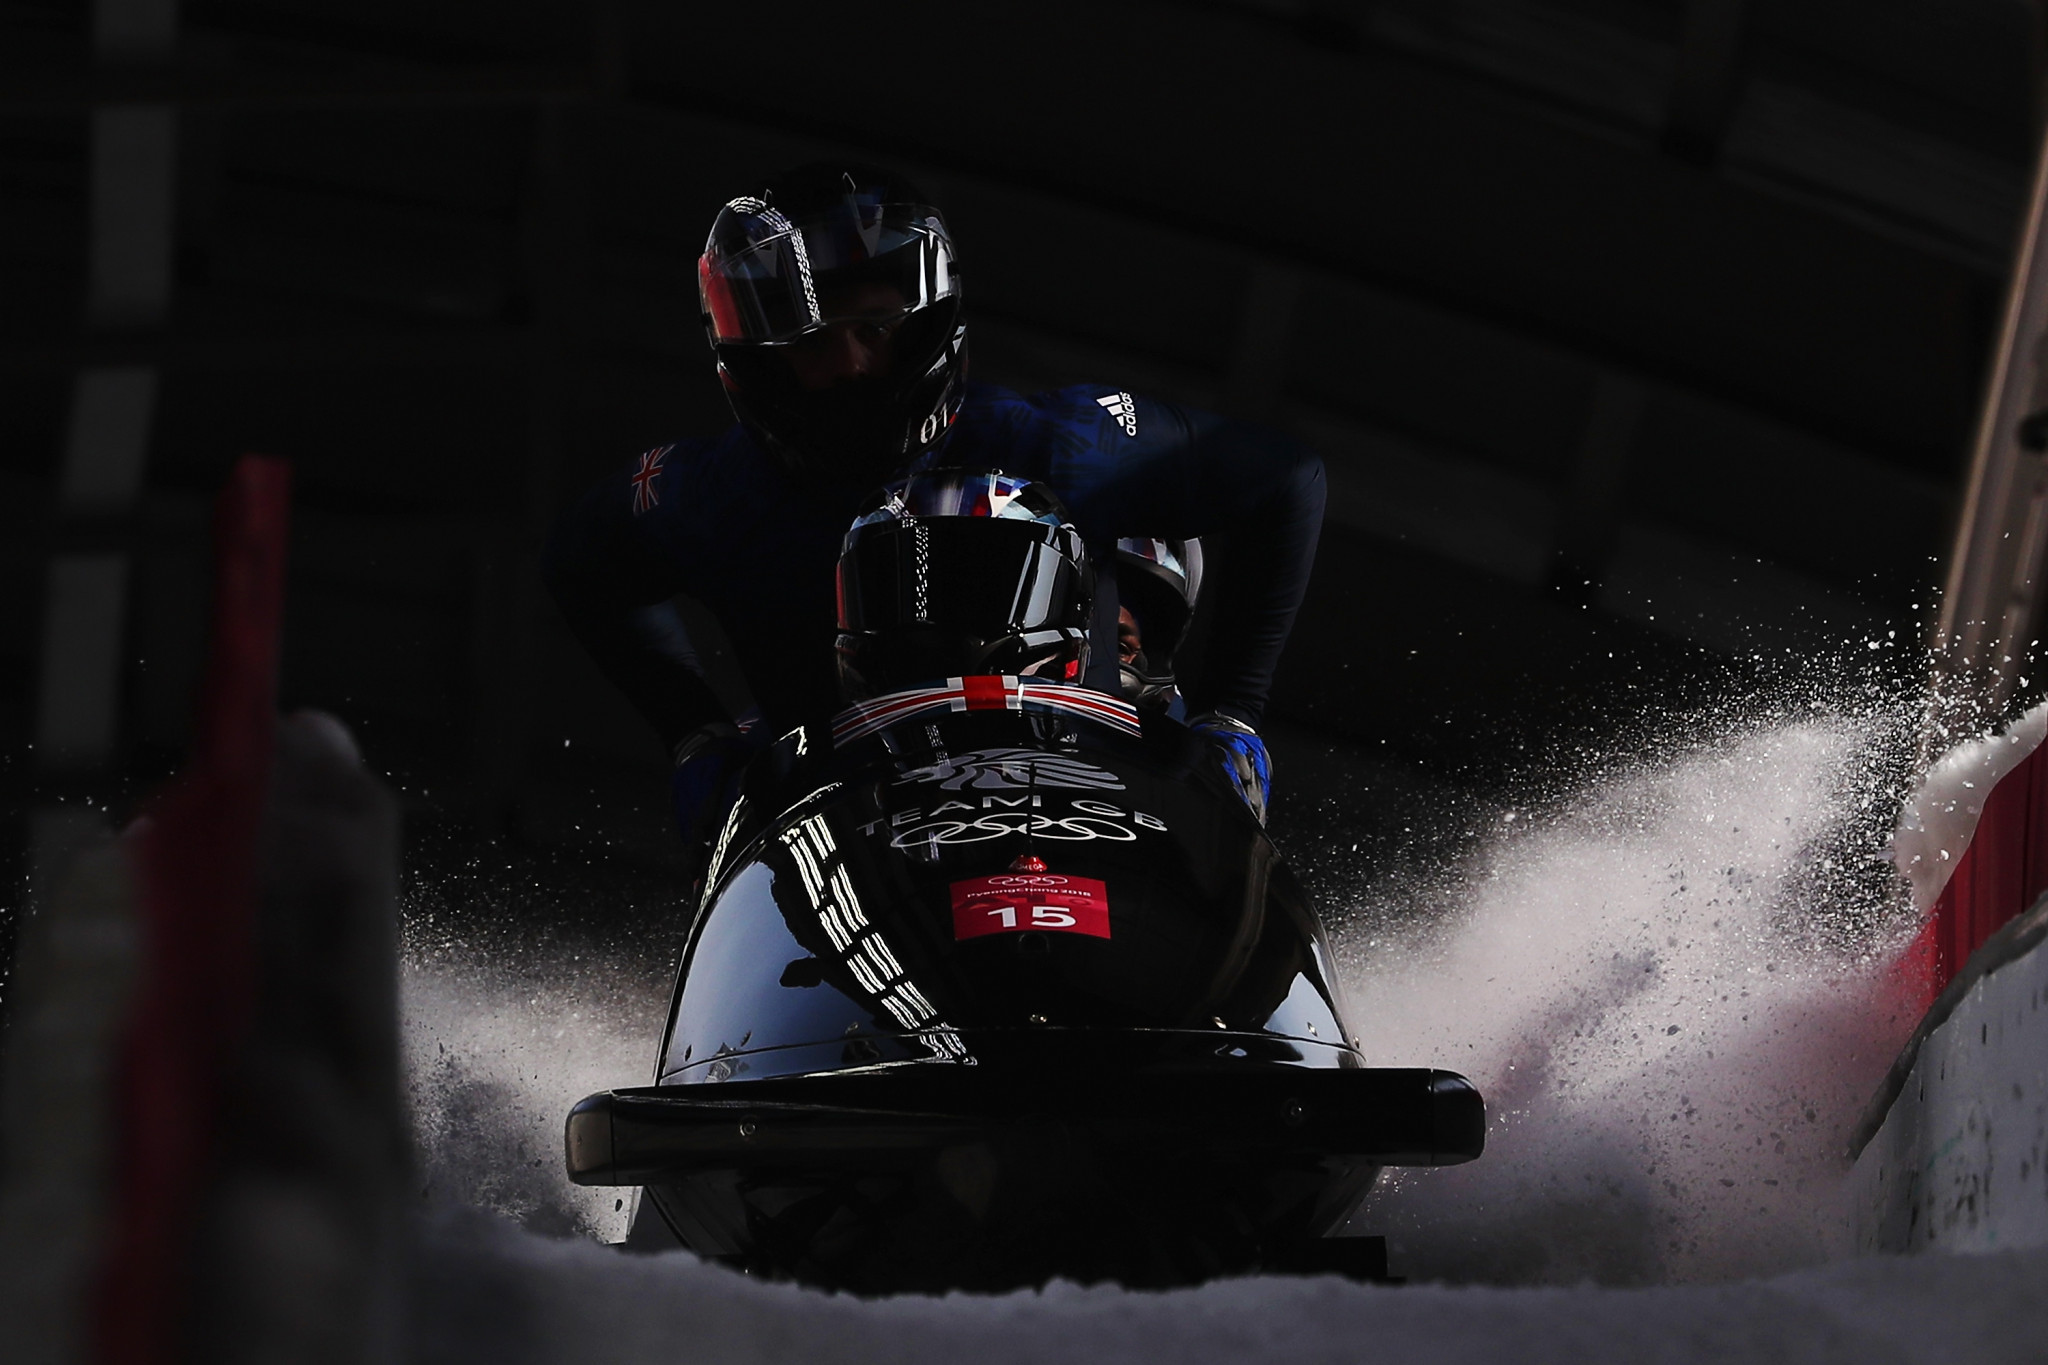 Britain is raising funds to buy a new four-man bobsleigh sled  ©Getty Images